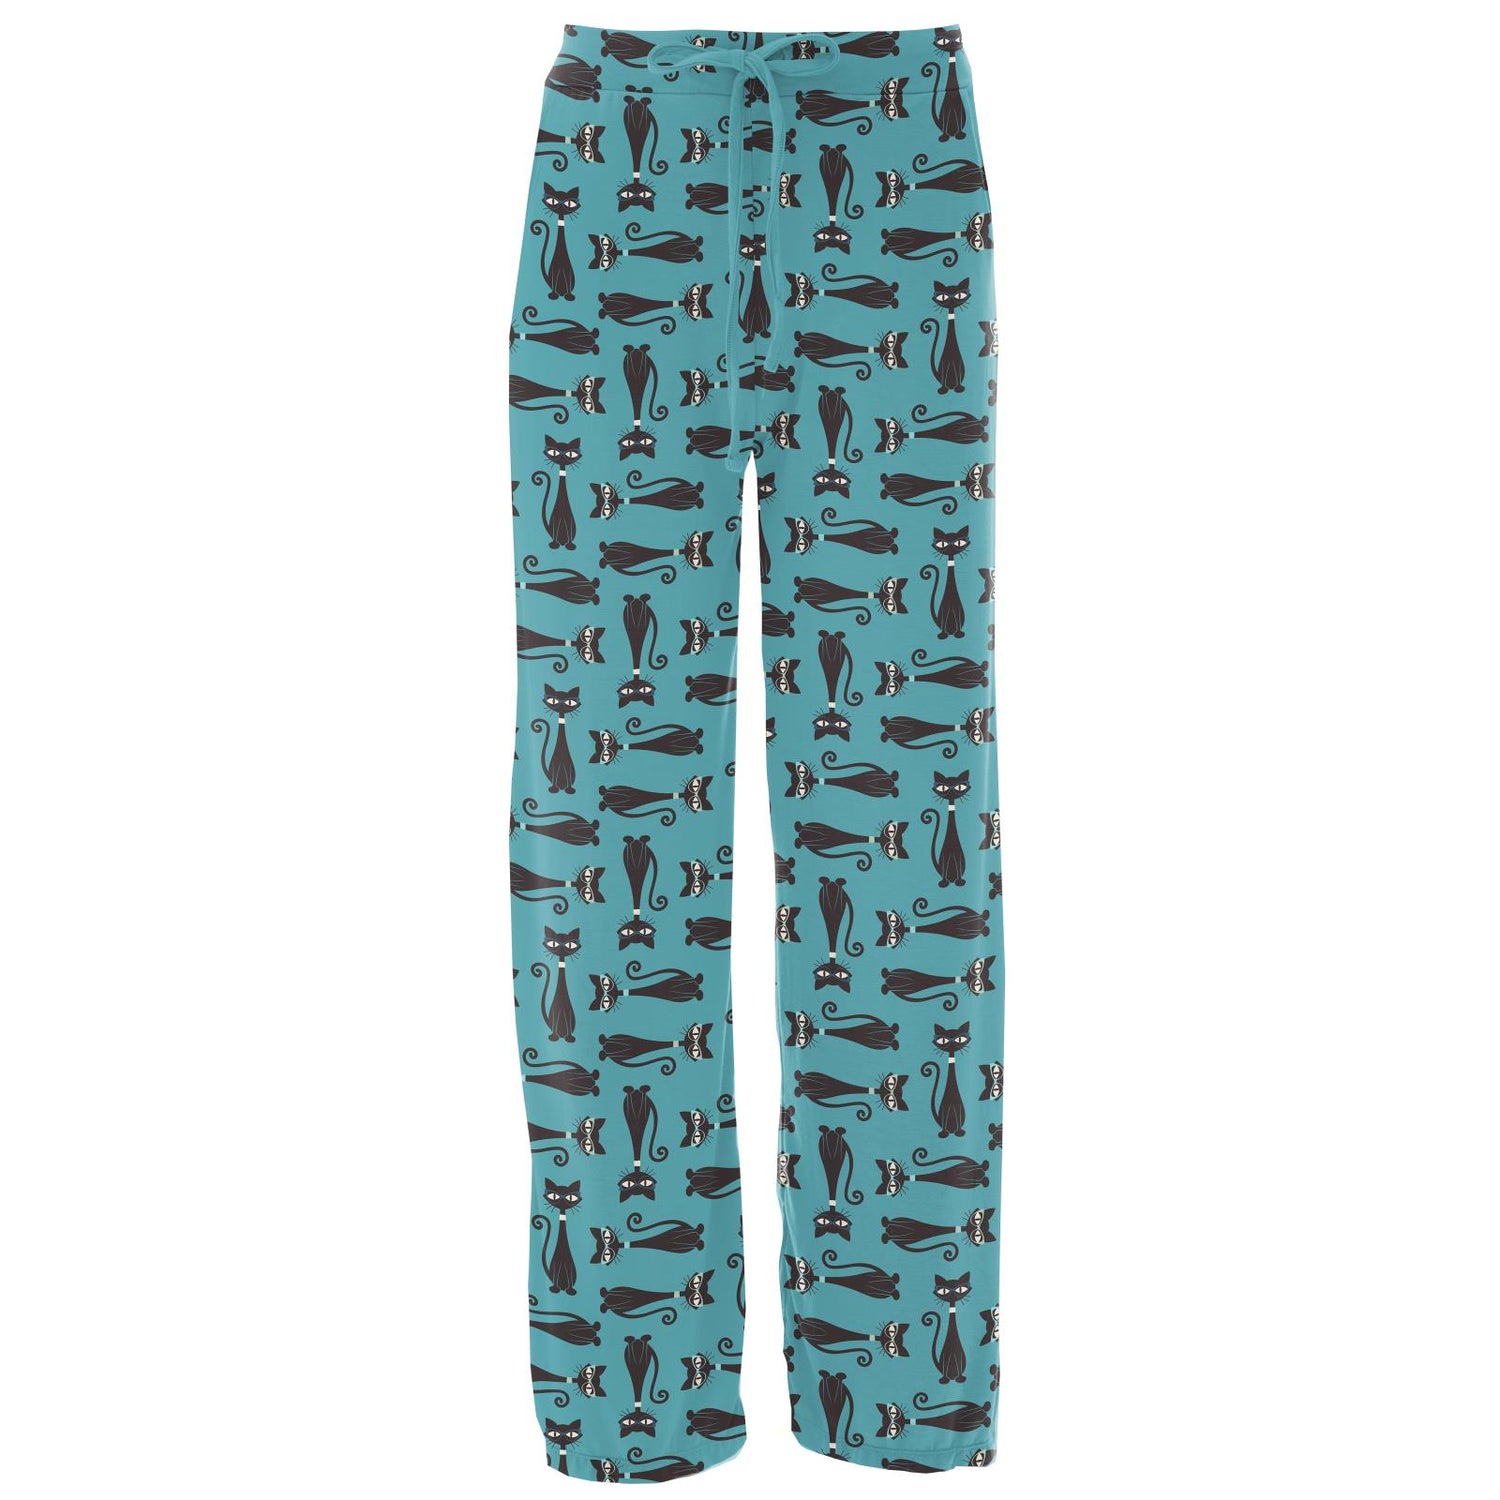 Women's Print Lounge Pants in Glacier Cool Cats